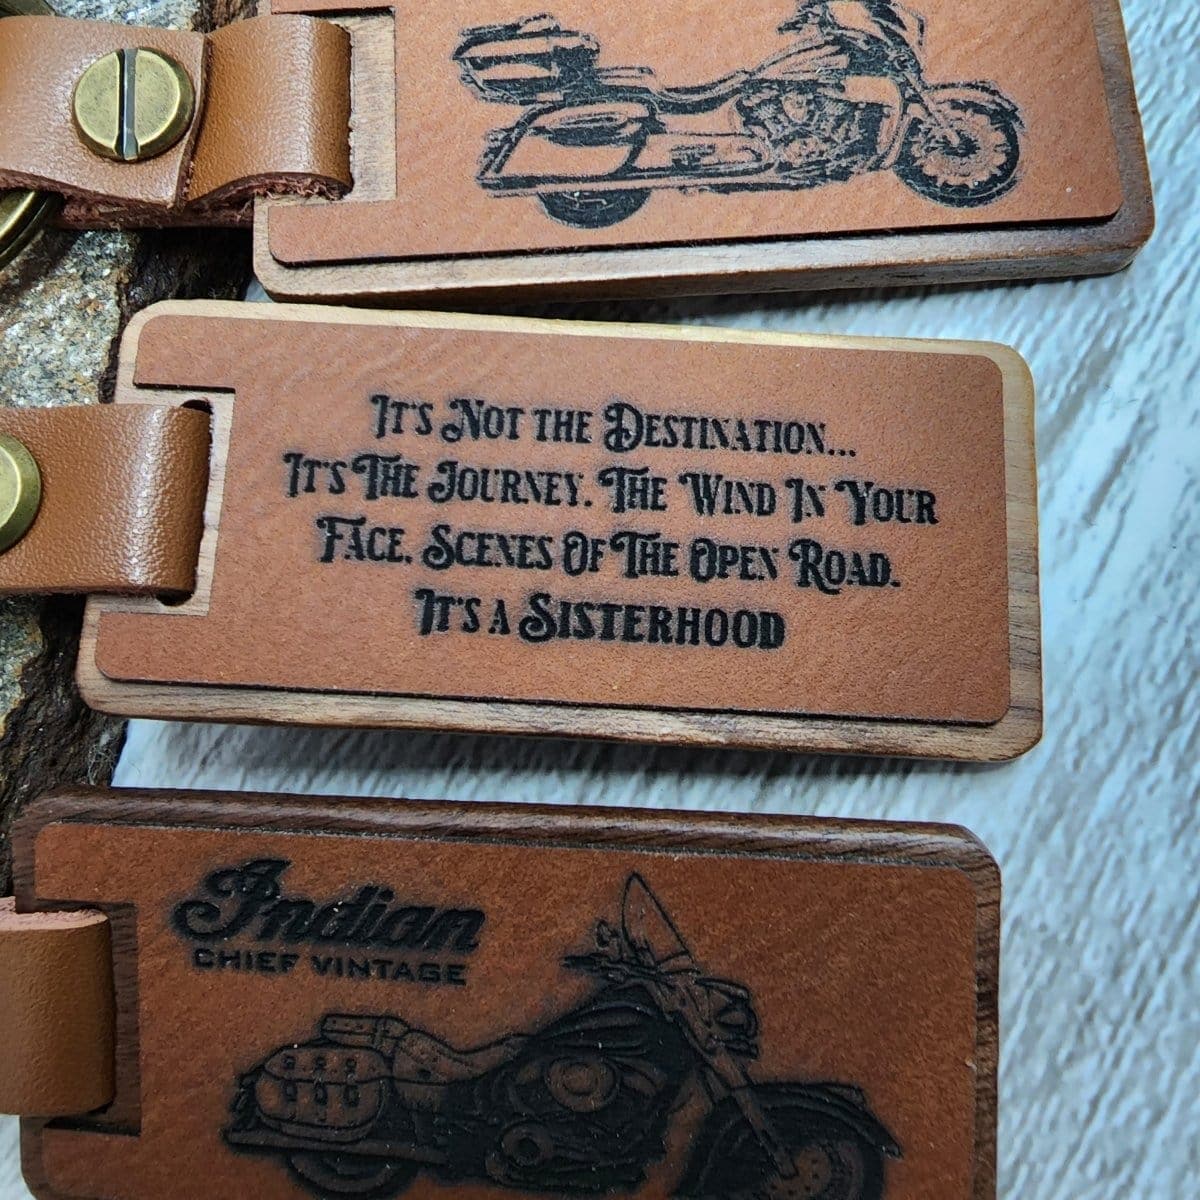 Indian Vintage Motorcycle Key Chain Ring Personalized